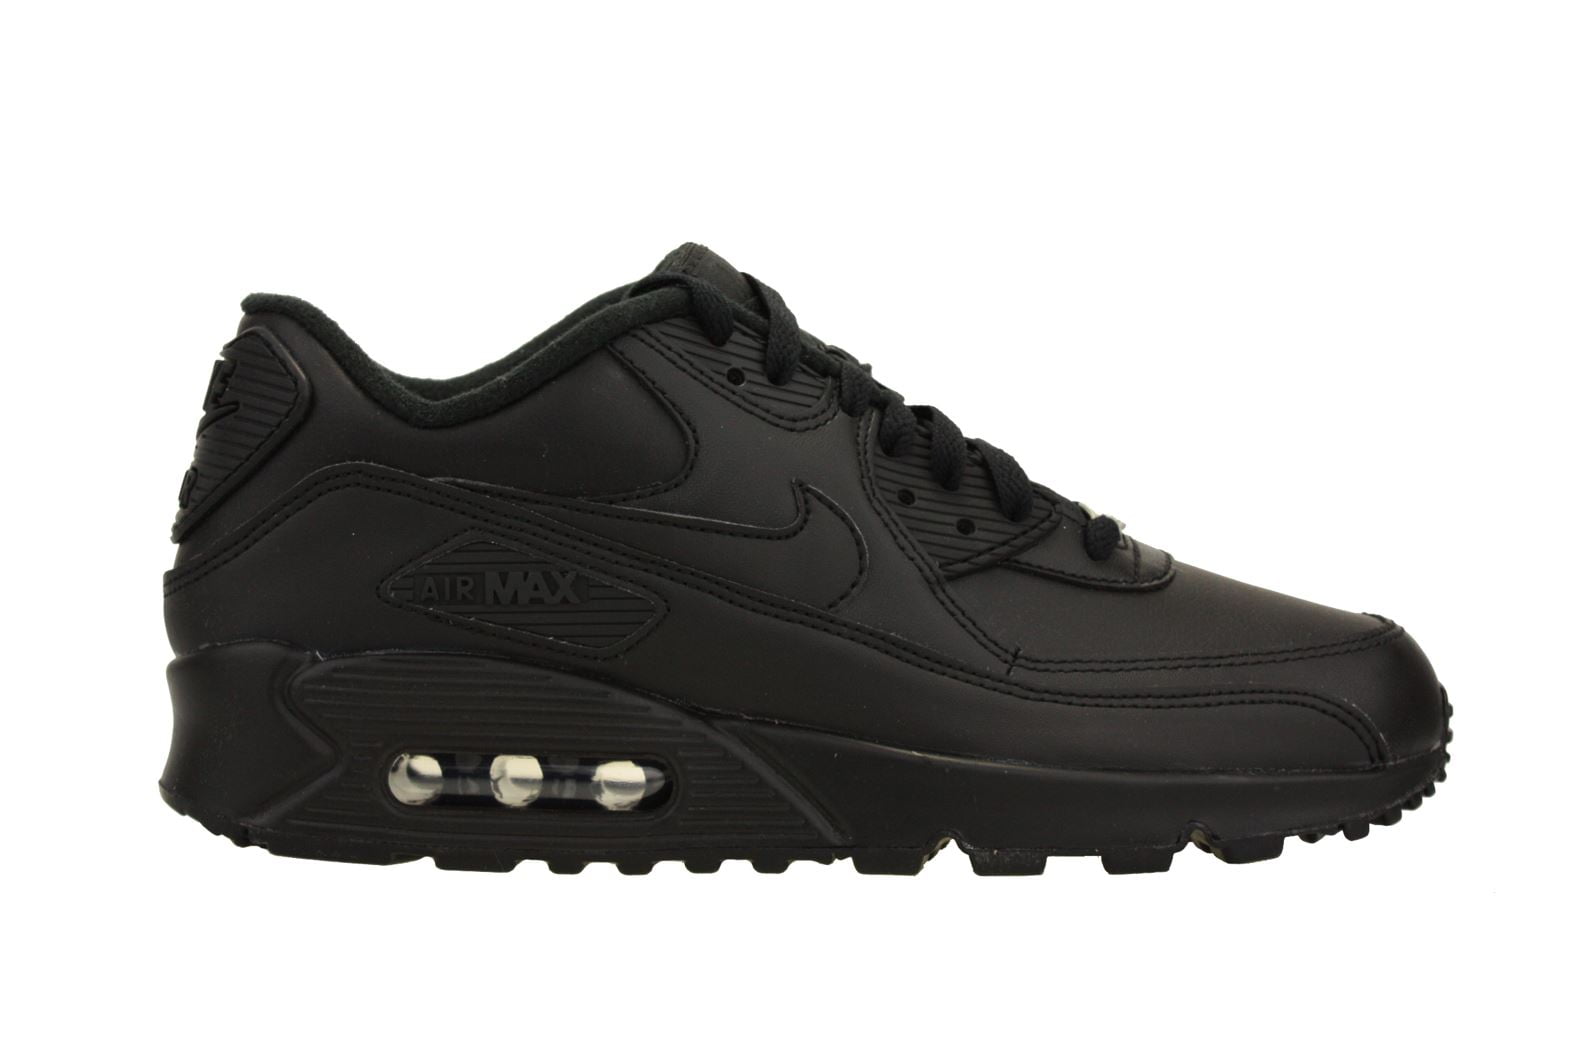 interference Calligrapher at least Nike Mens Air Max 90 Leather Running Shoes Black/Black 302519-001 Size 10 -  Walmart.com